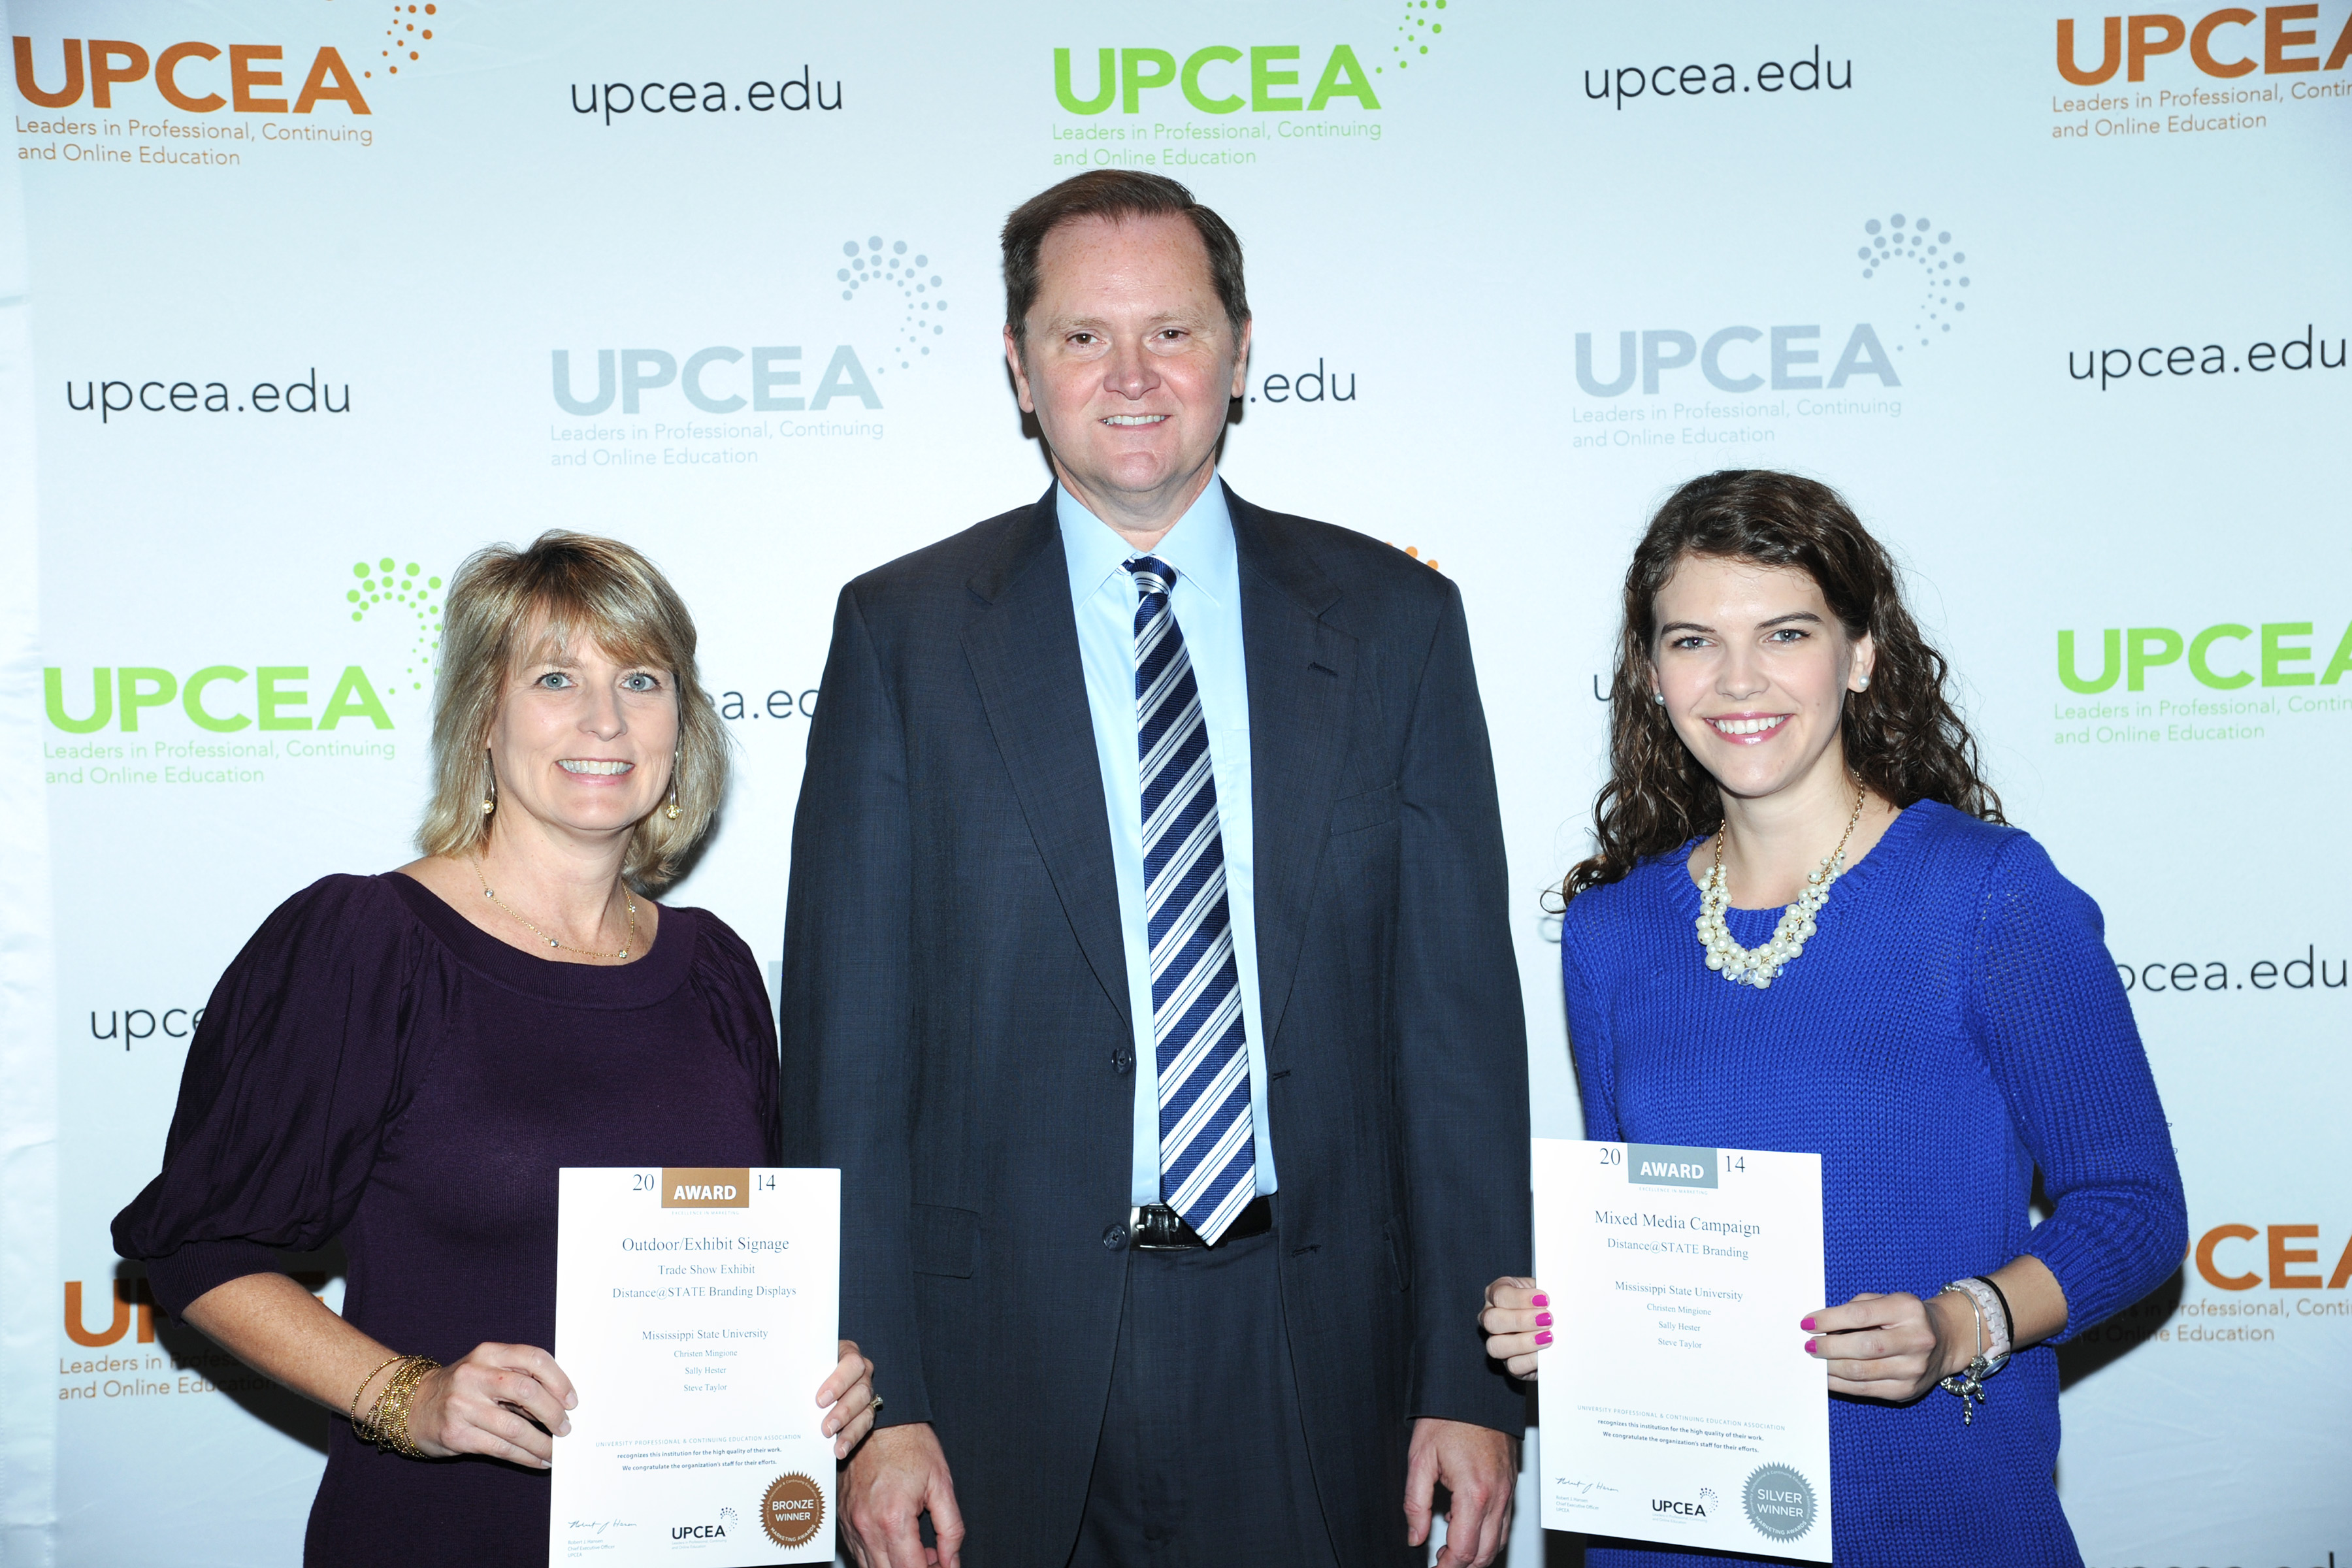 Pictured receiving the award for MSU's Center for Distance Education are, from left, Mindy Wolfe, CDE program coordinator; Bob Hansen, UPCEA CEO; and Tatum Turan, CDE communications specialist. 